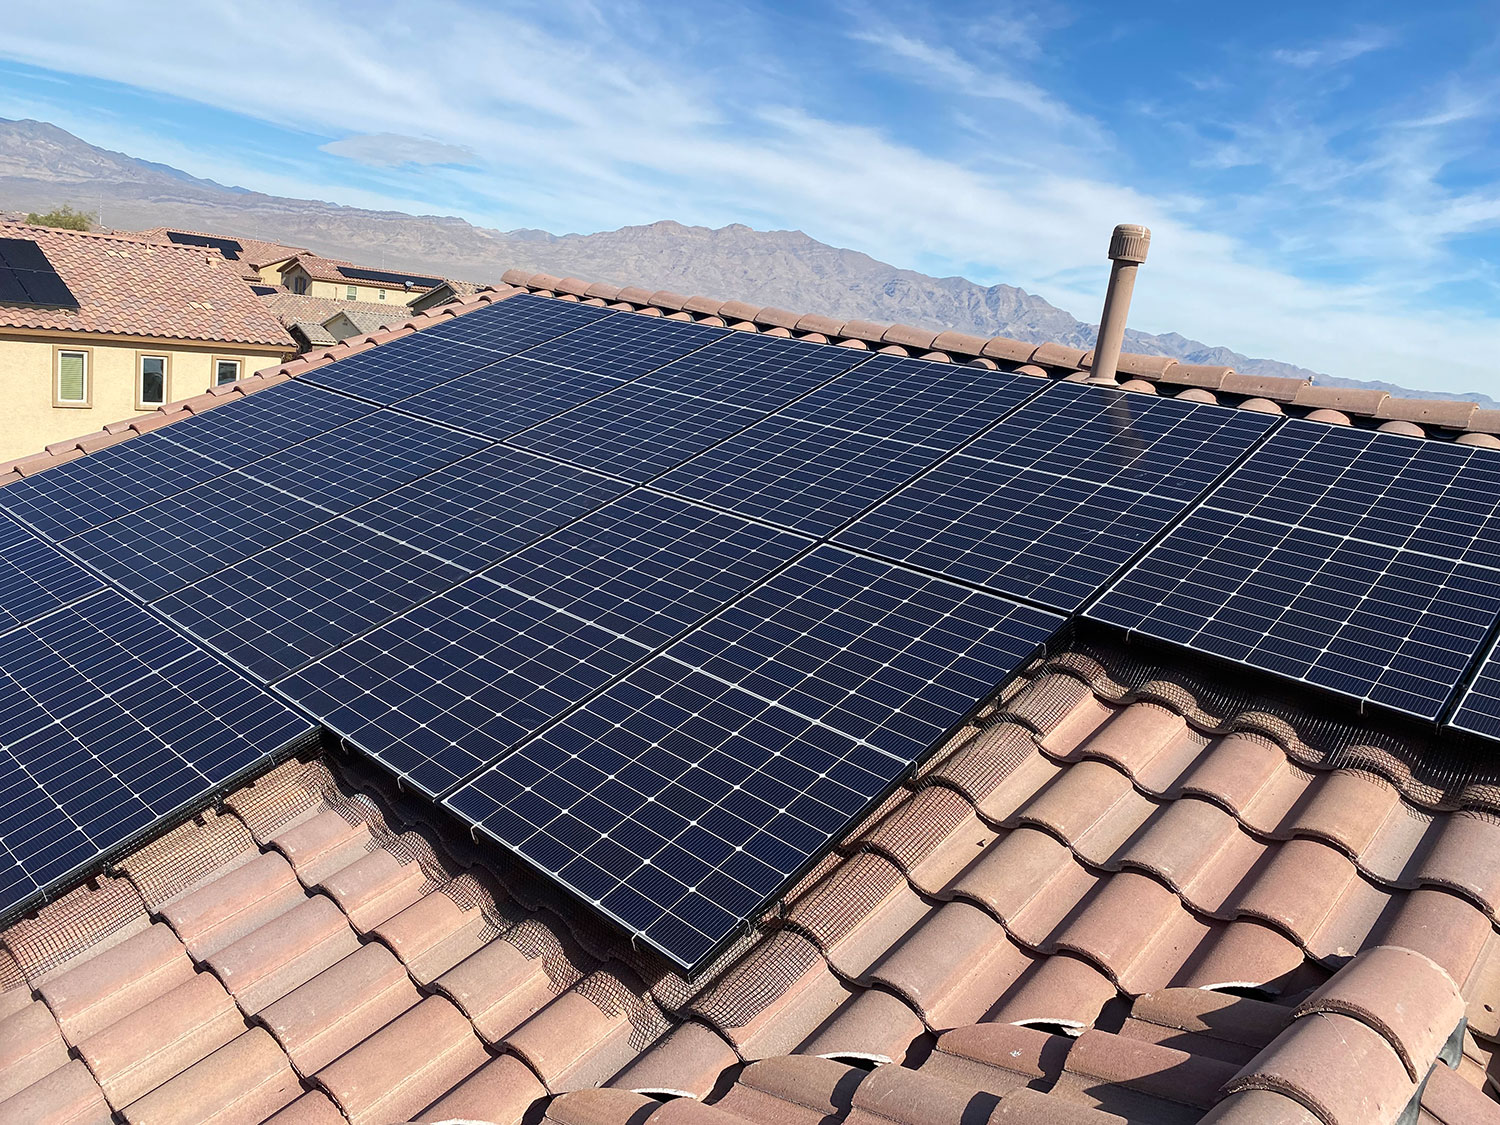 Solar services, Indian Springs, Southern Nevada, Renewable energy, Solar panel installation, Solar energy solutions, Sustainable living, Clean energy, Solar power, Energy efficiency, Climate-friendly solutions